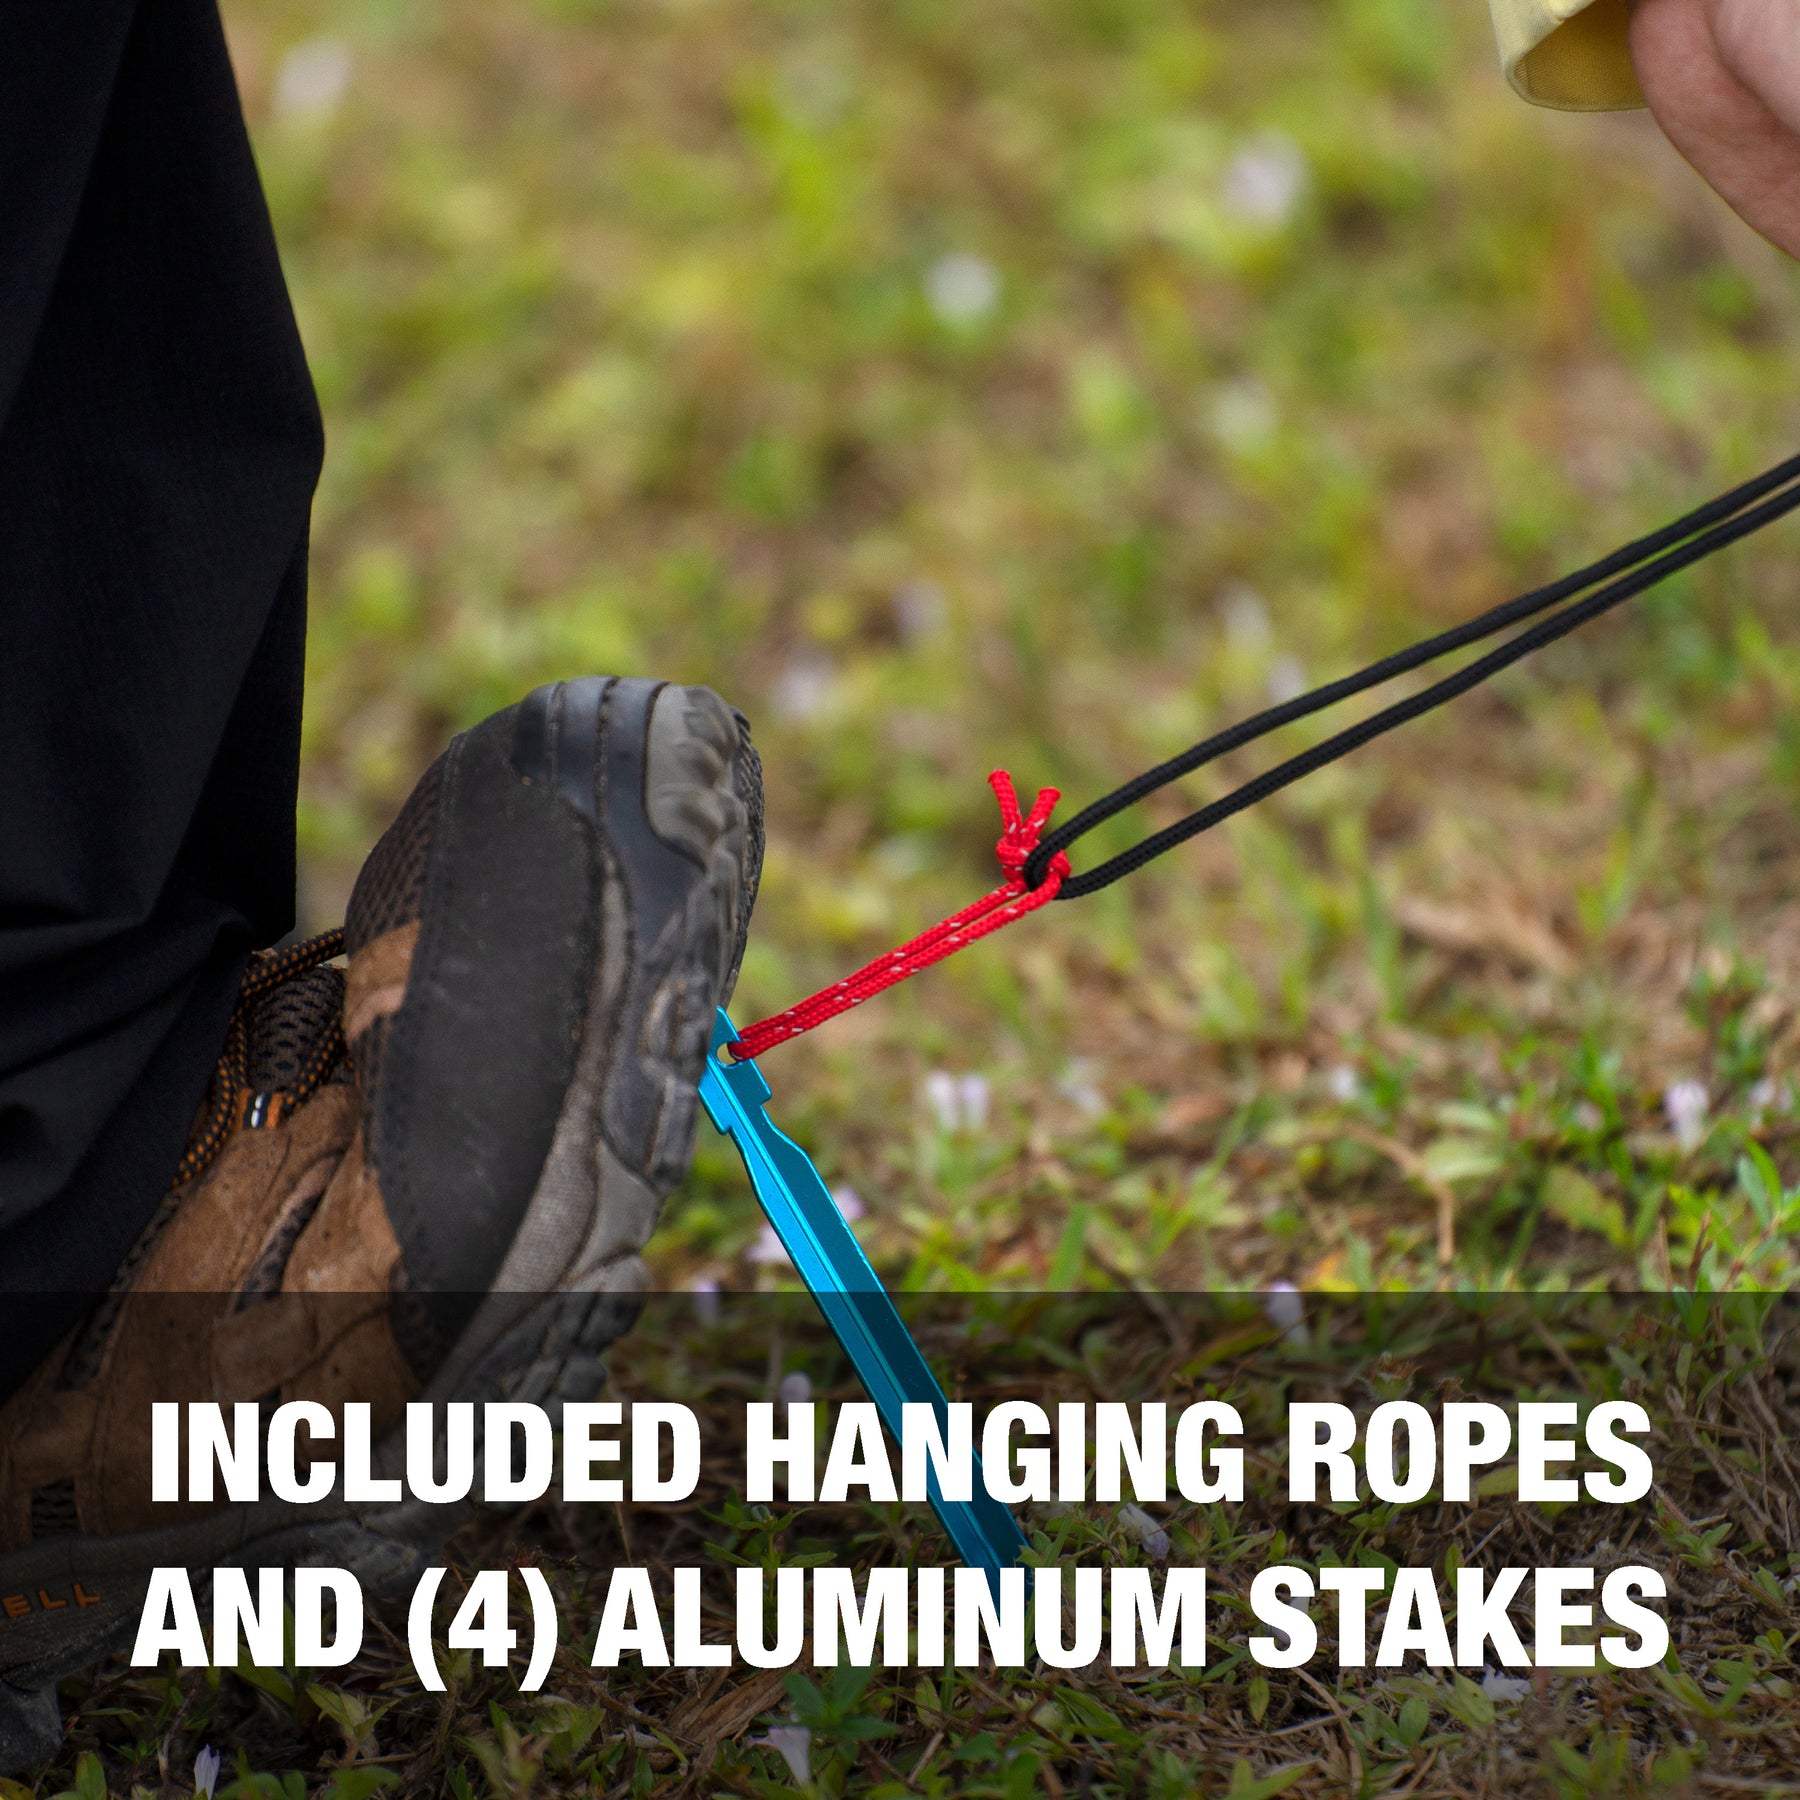 Included hanging roped and 4 aluminum stakes.